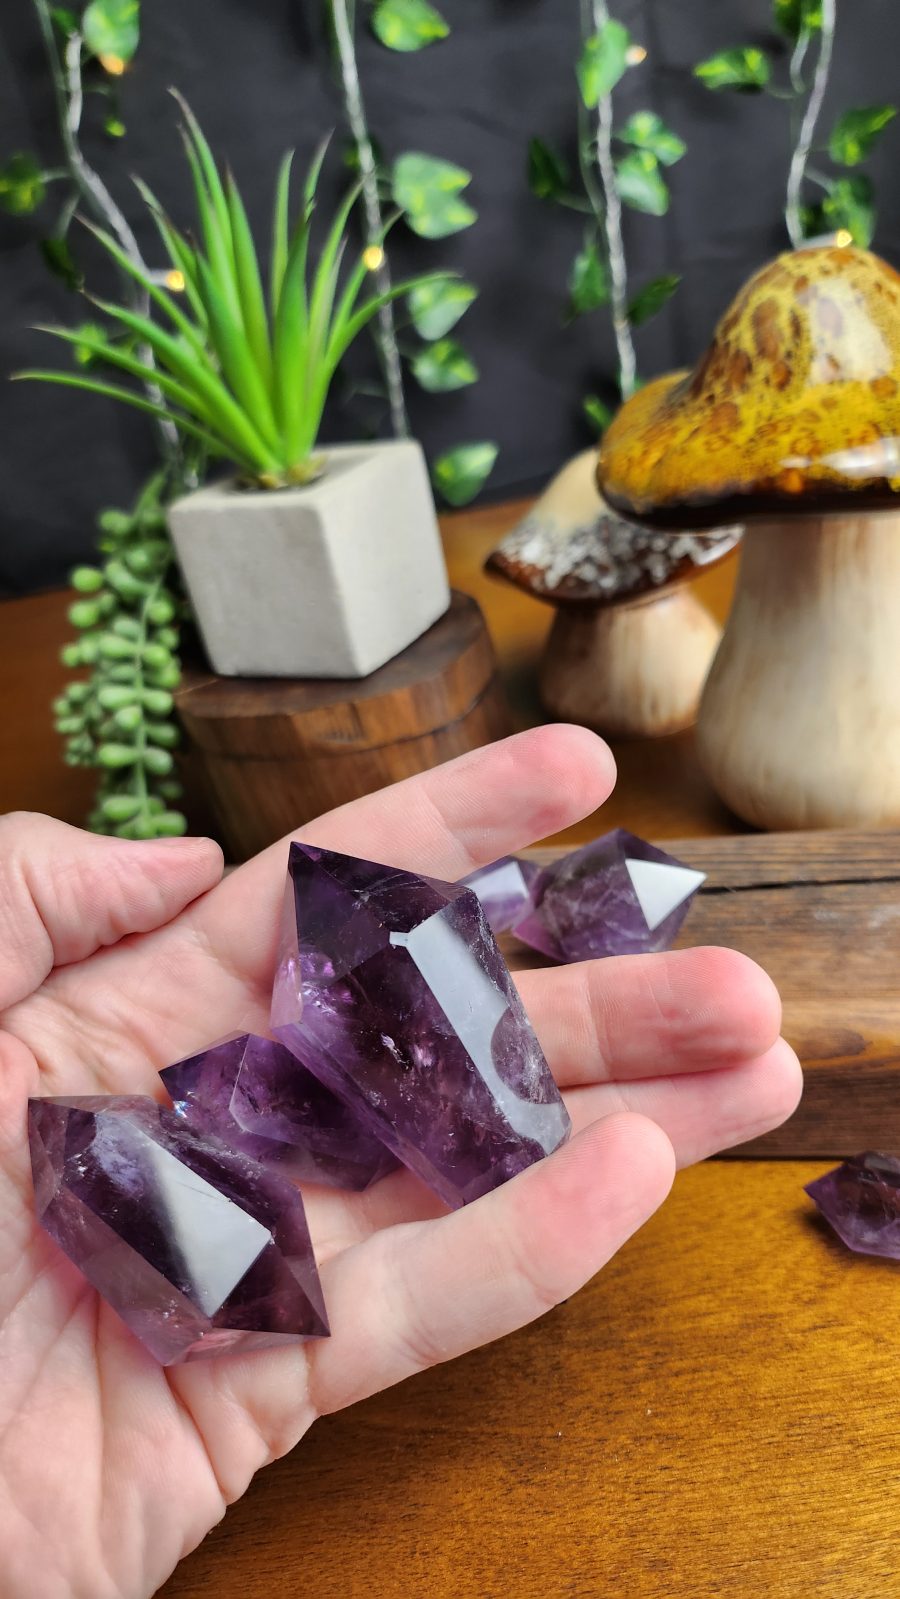 Double Terminated Amethyst crystals shown in hand for scale.